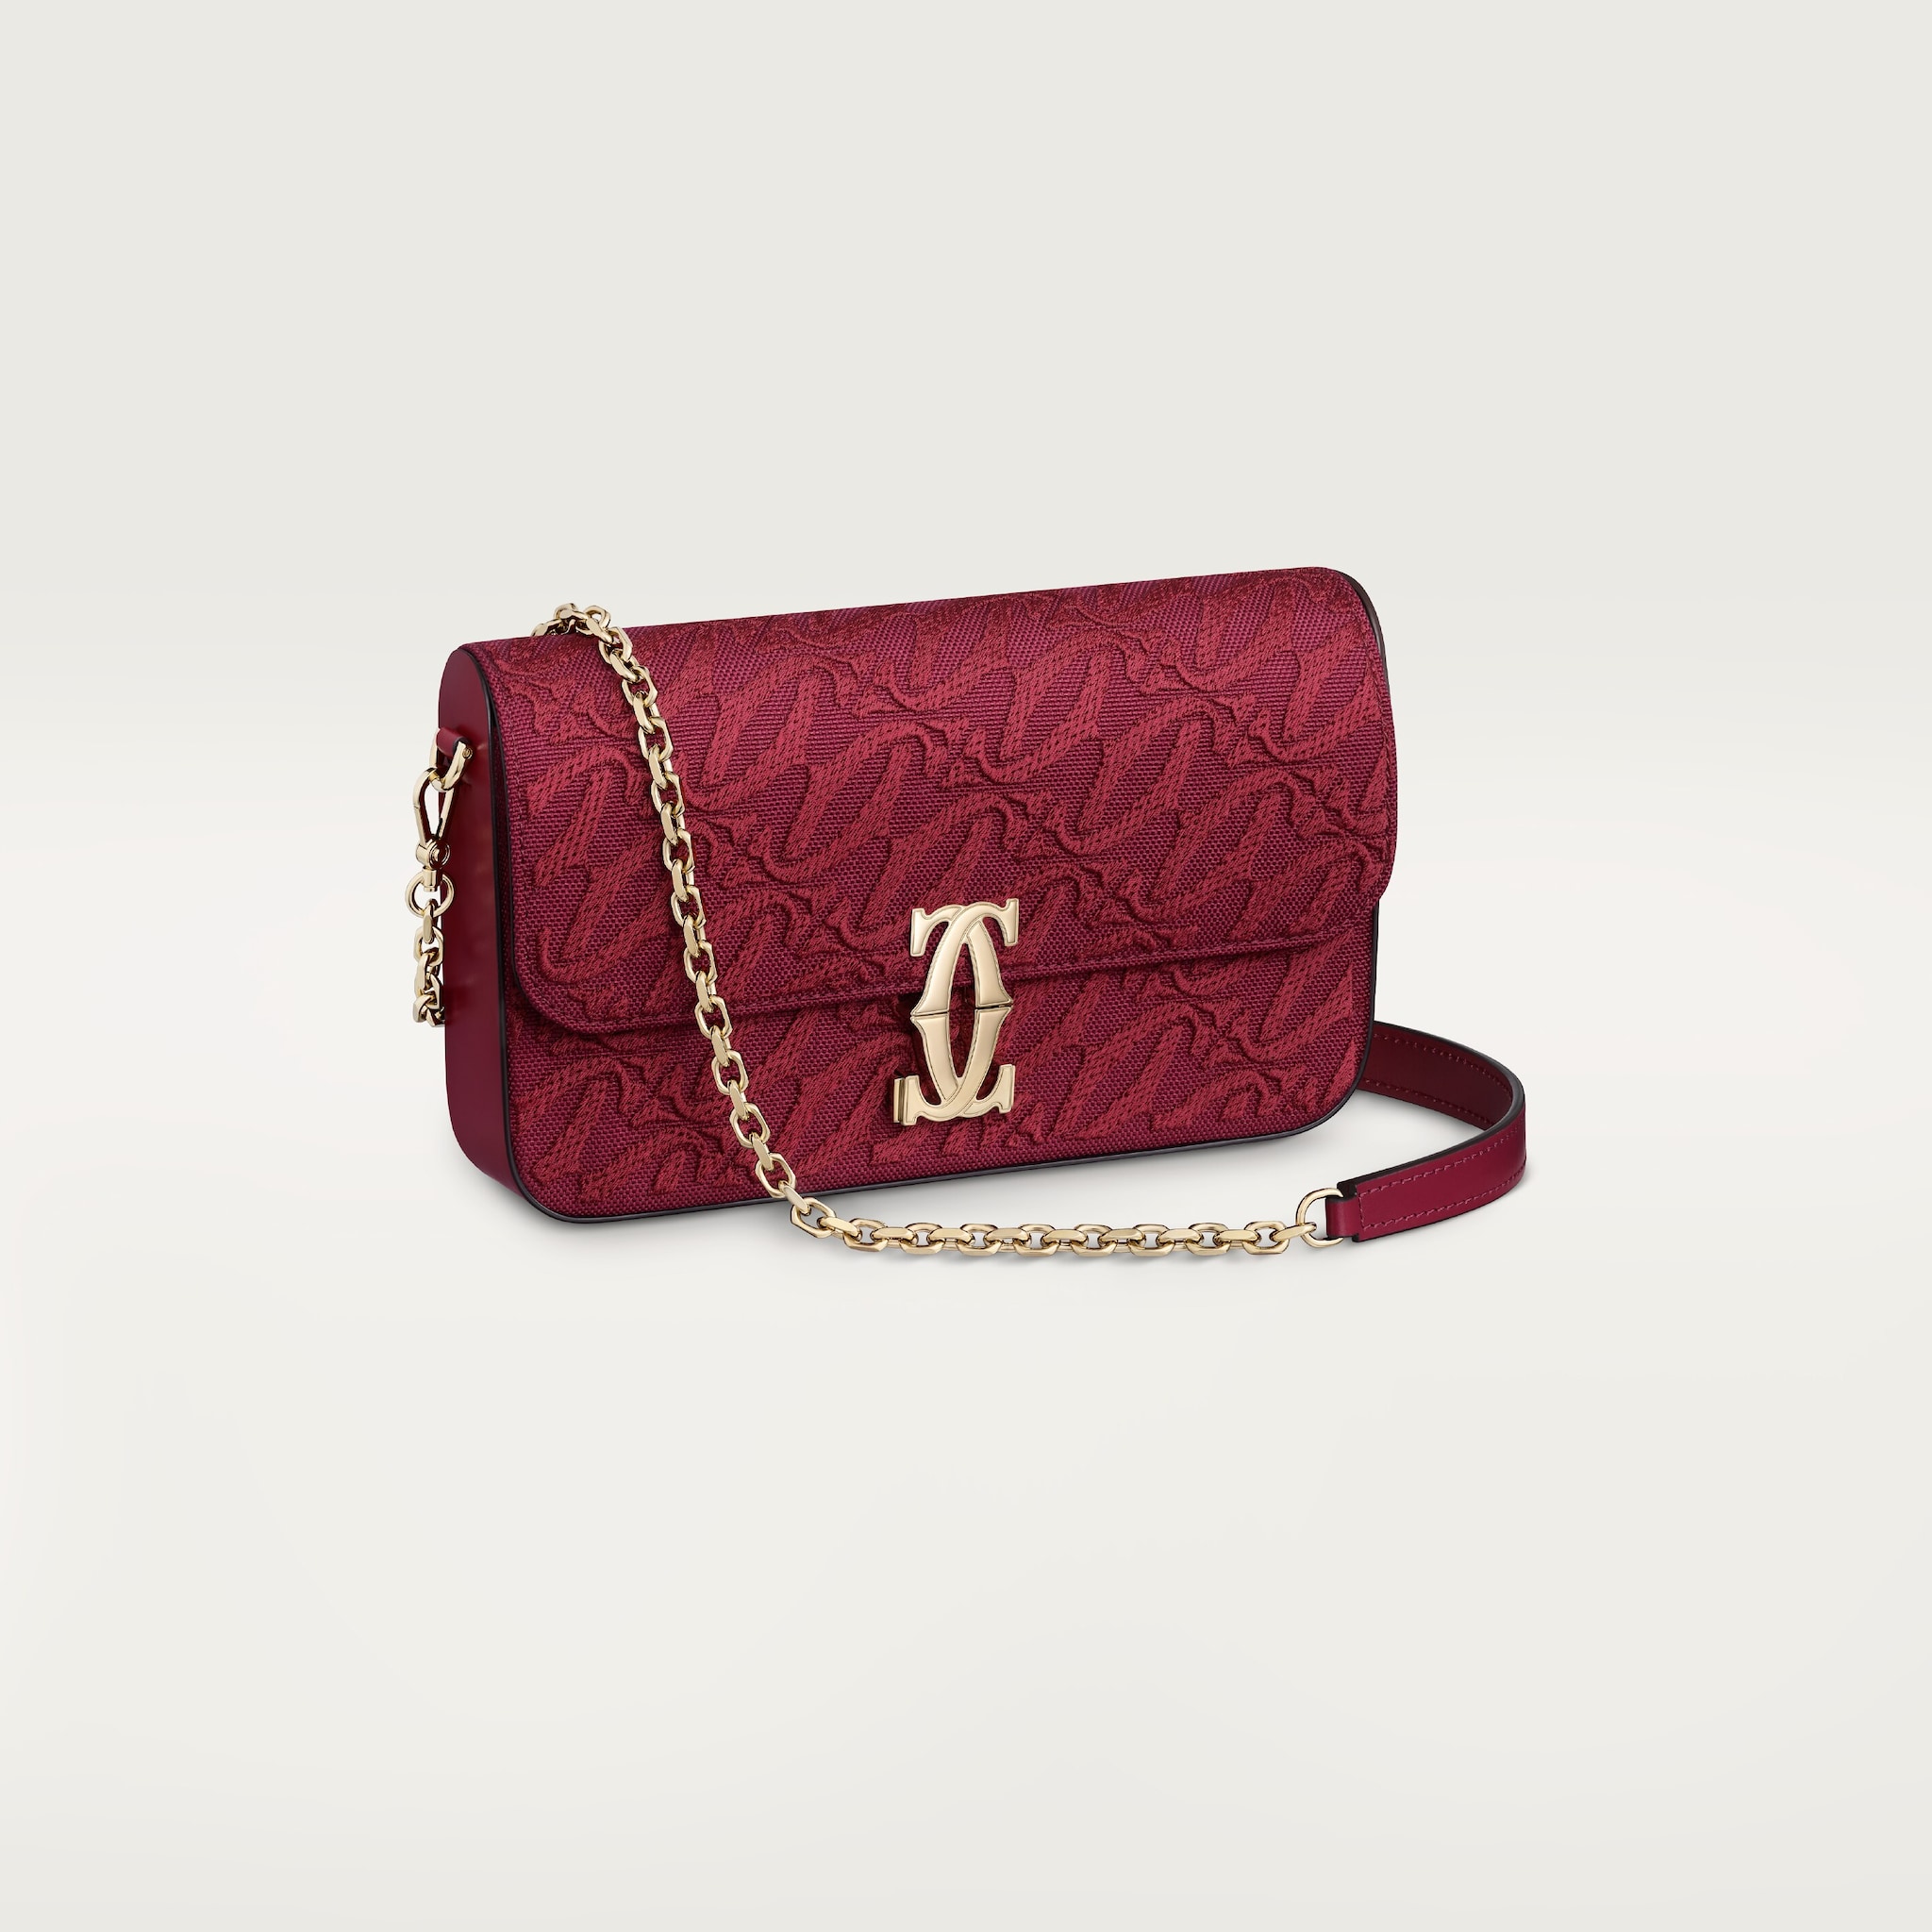 Mini chain bag, C de CartierEmbroidery and cherry red calfskin, golden finish